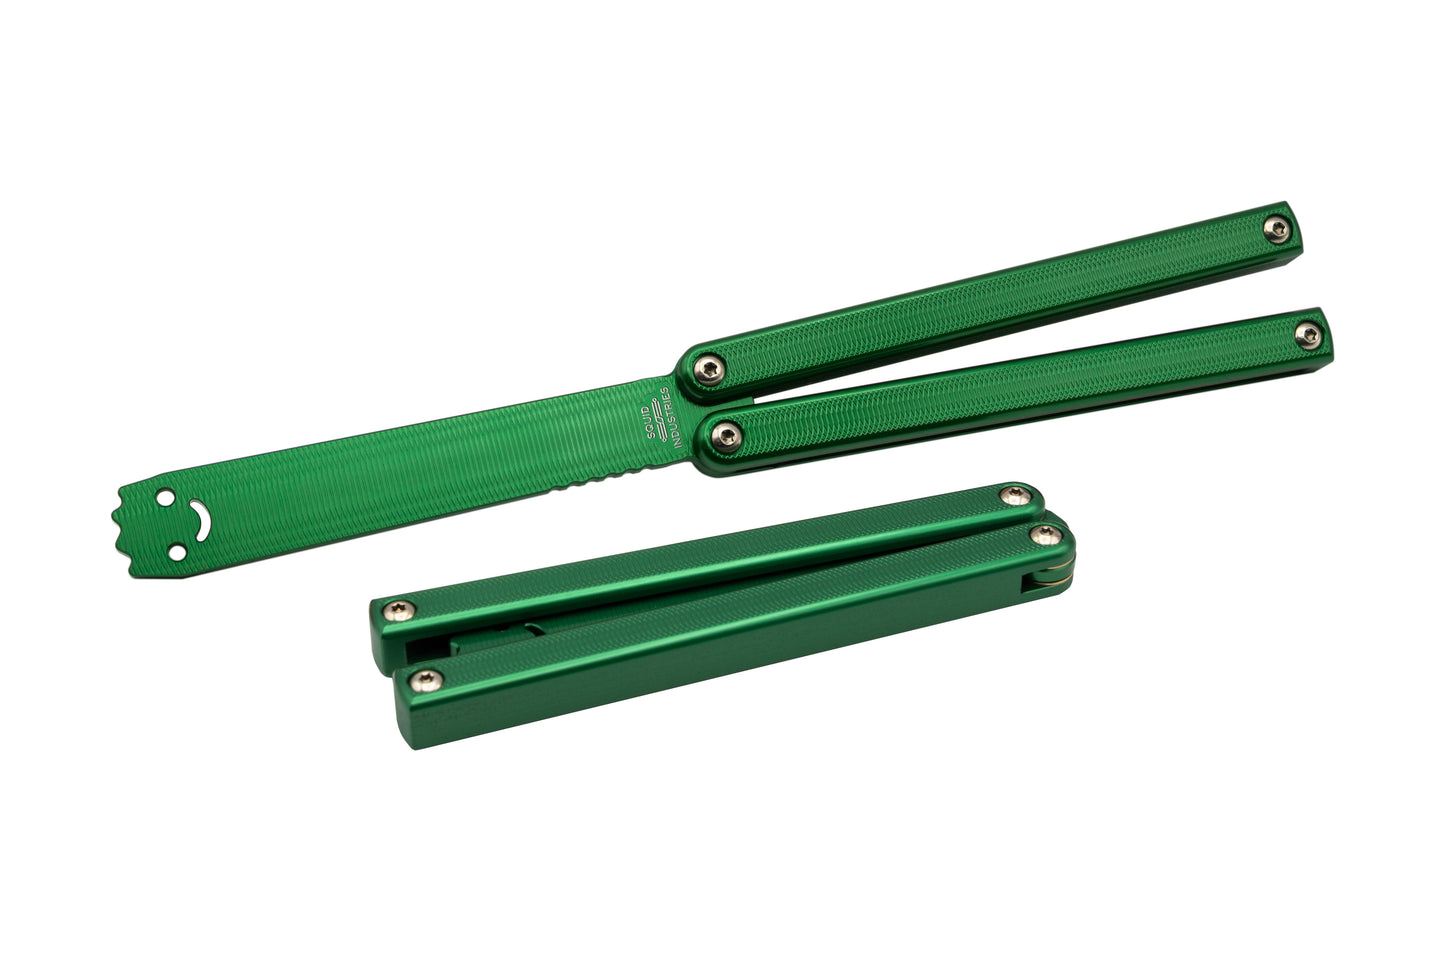 green squiddy-al balisong butterfly knife trainer open and closed 